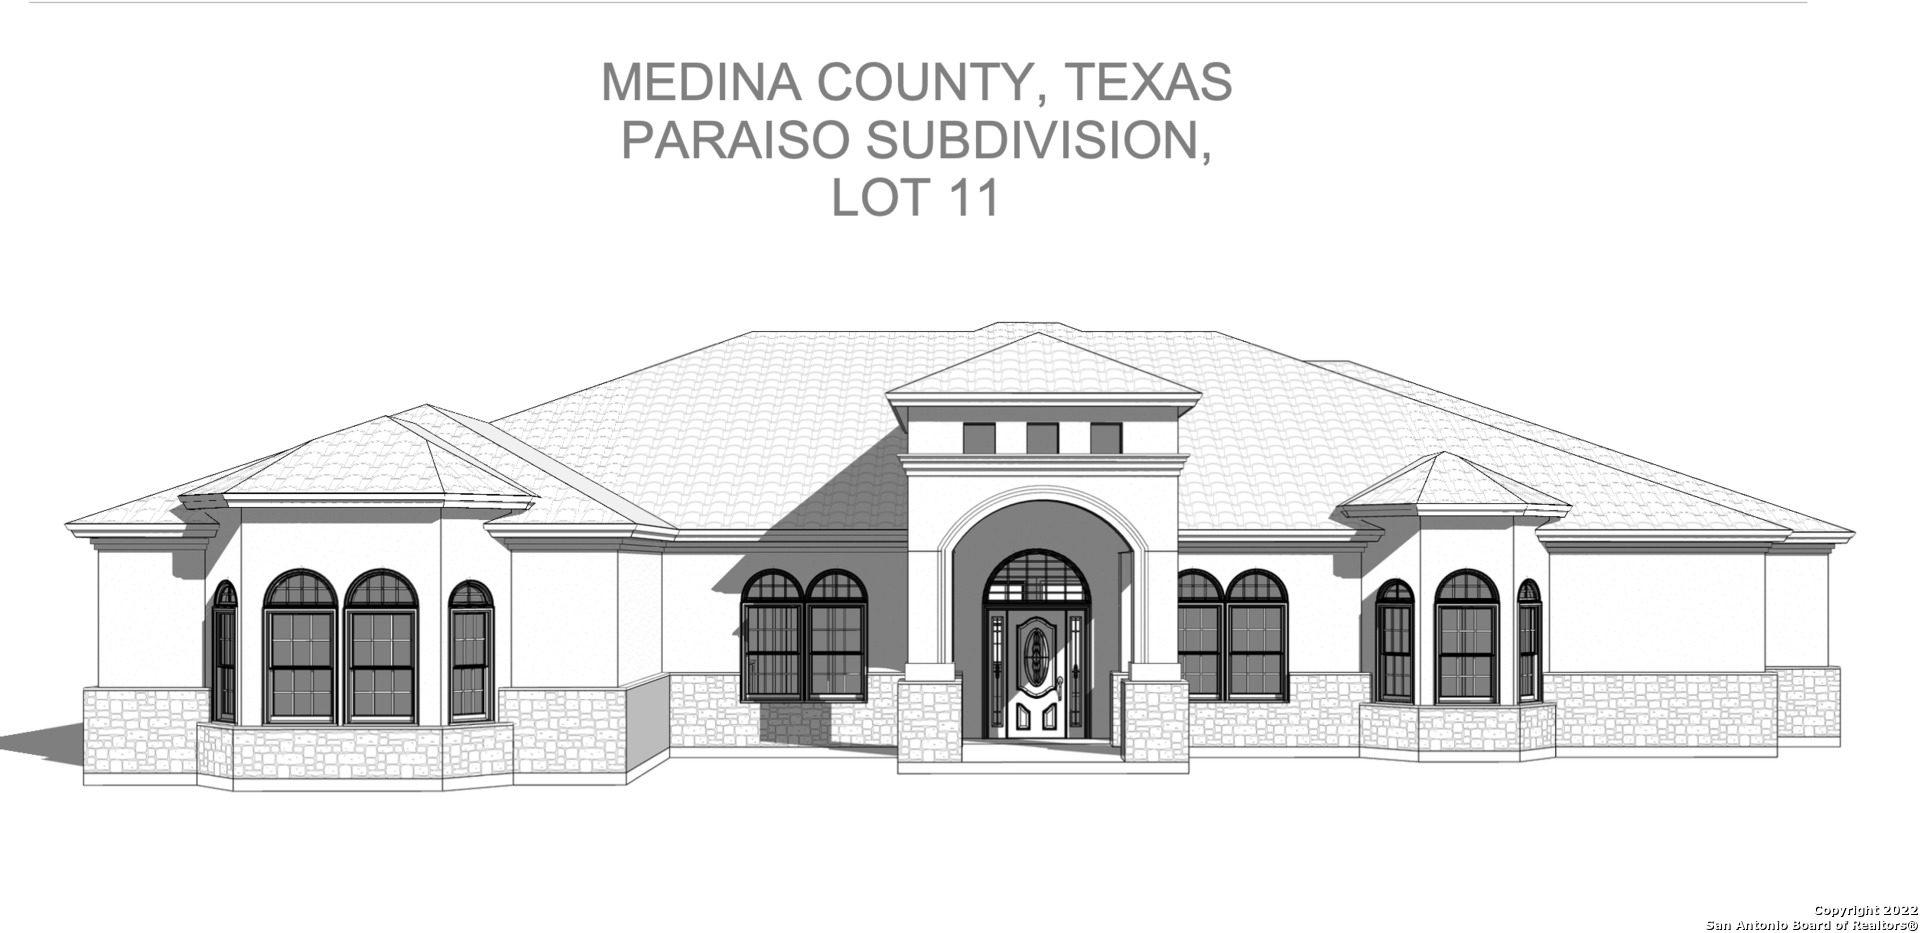 Welcome to Venado Oaks! This upcoming and much-anticipated community will offer upscale living starting with gated access and followed by paved roads and driveways that lead into oversized homesites all over an acre! Each home will be constructed by custom builders and this home for sale now already has begun construction with a projected completion date of February/March 2023. You can certainly view the floor plan and drive through the community to see progress but why wait and let this opportunity go?? Schedule a Construction meeting with us to see how much you can still customize, color selections, and more details!